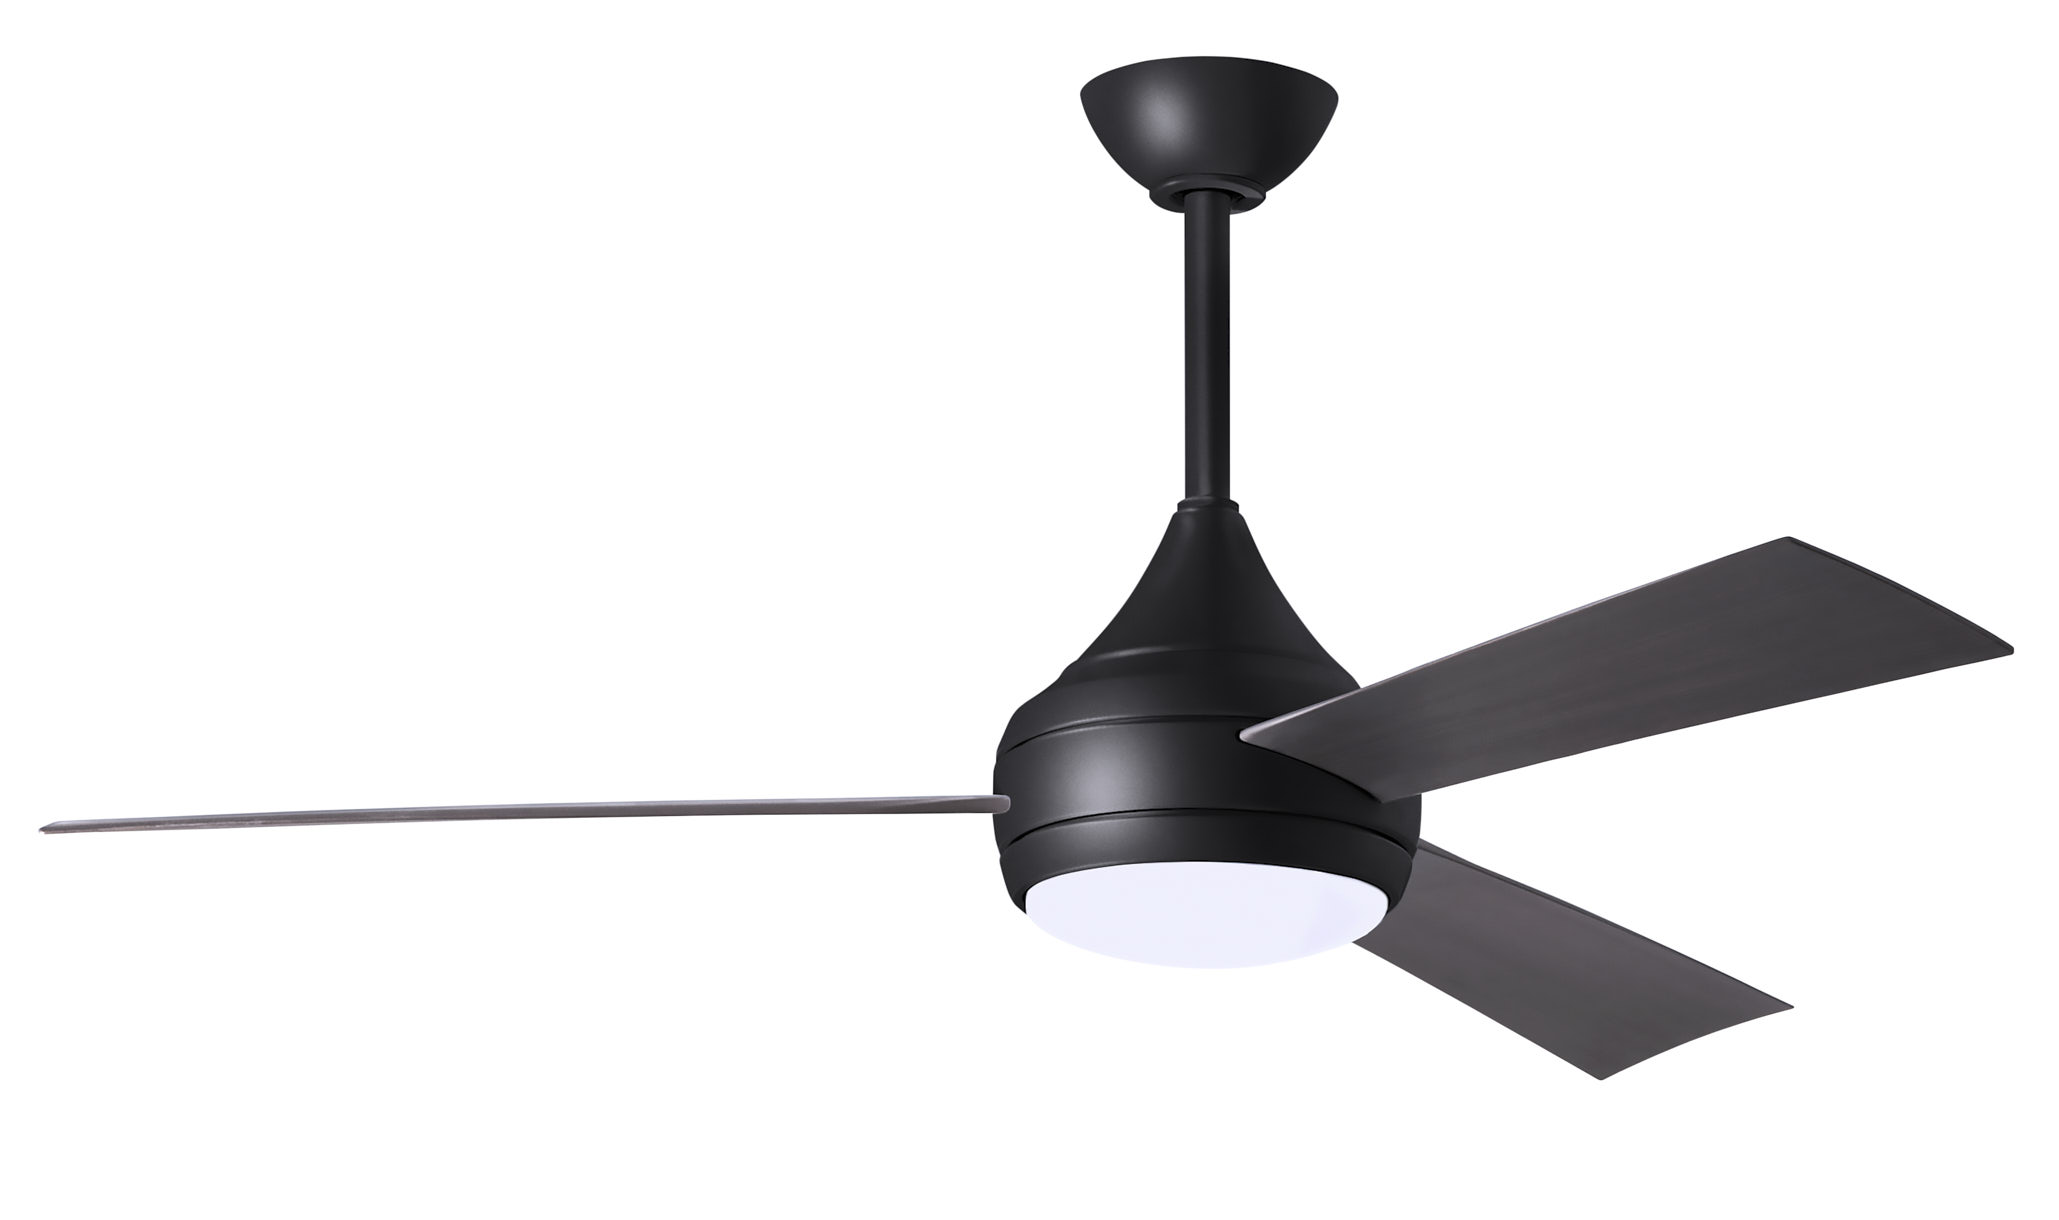 Donaire ceiling fan in Matte Black with Brushed Bronze blades without light cap manufactured by Matthews Fan Company.